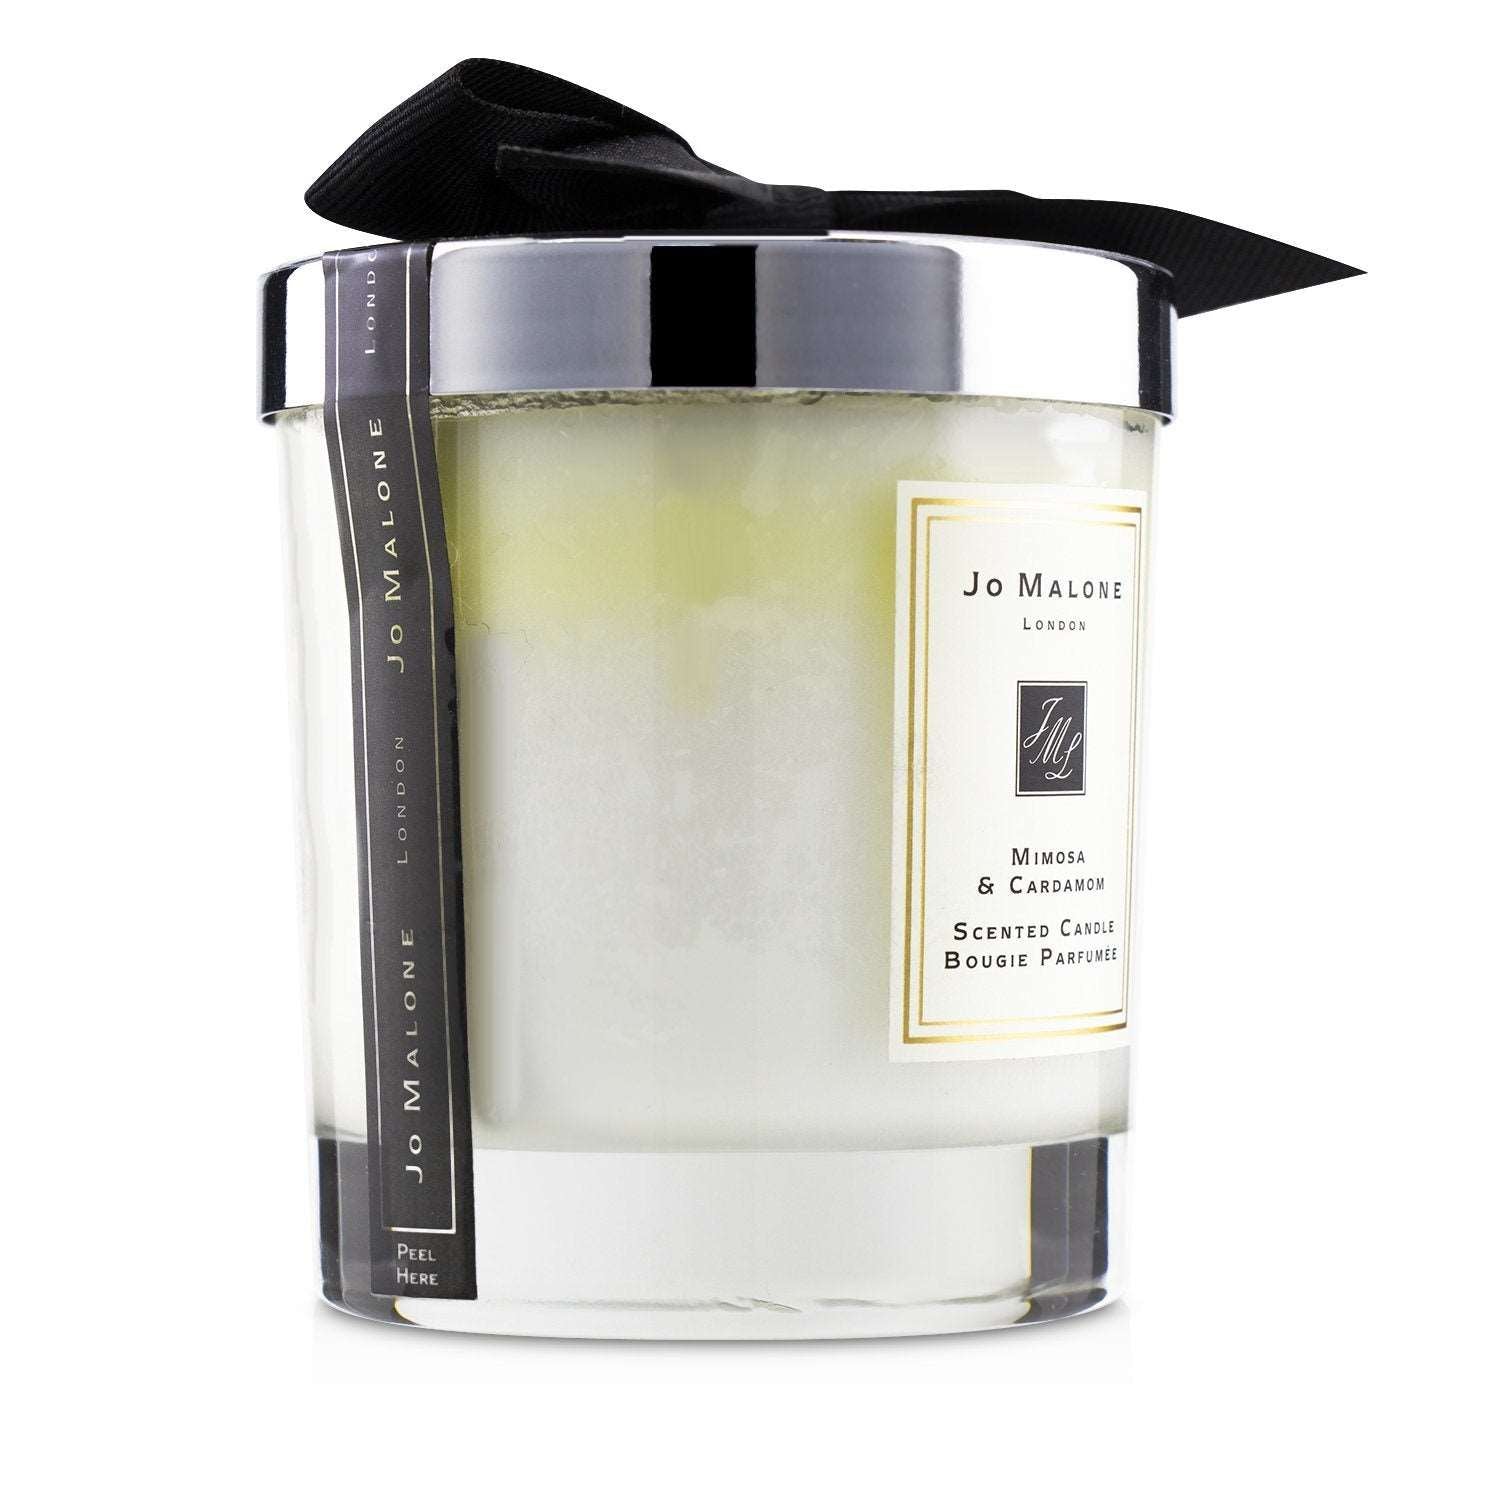 JO MALONE - Mimosa & Cardamom Scented Candle - 200g (2.5 inch) 3P's Inclusive Beauty